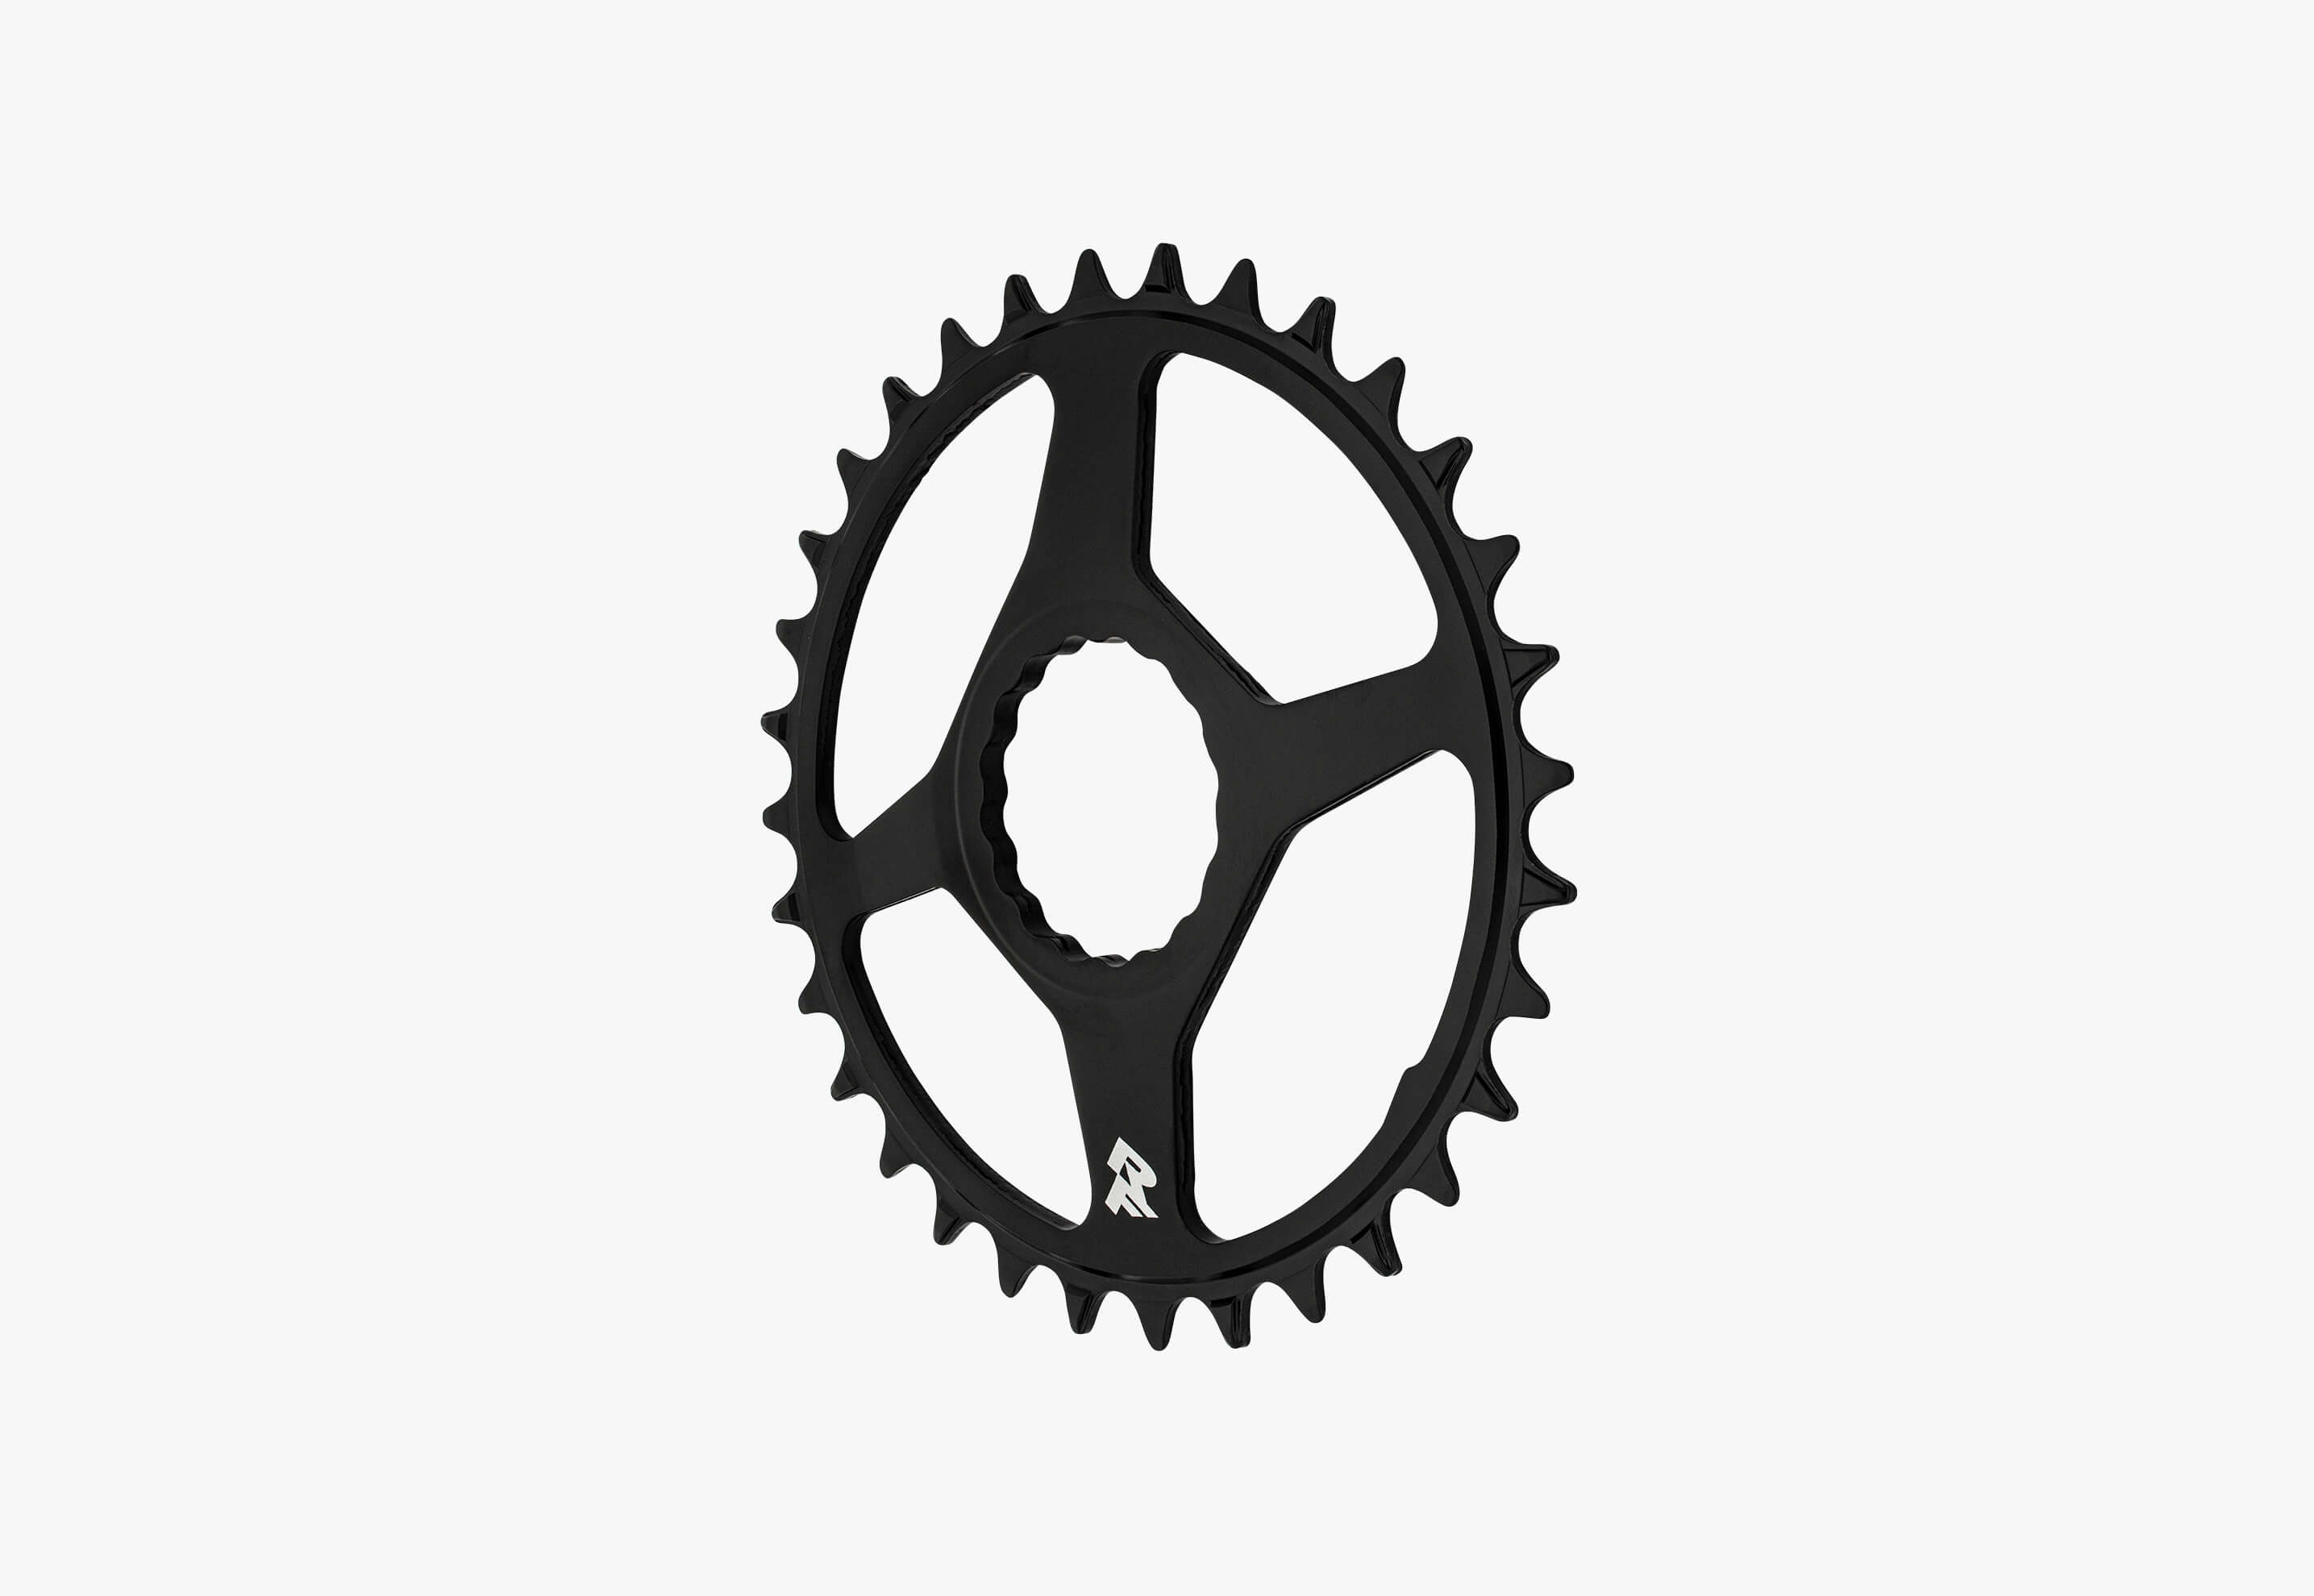 1x Chainring, Cinch Direct Mount, NW - Steel | Raceface – Race Face CA